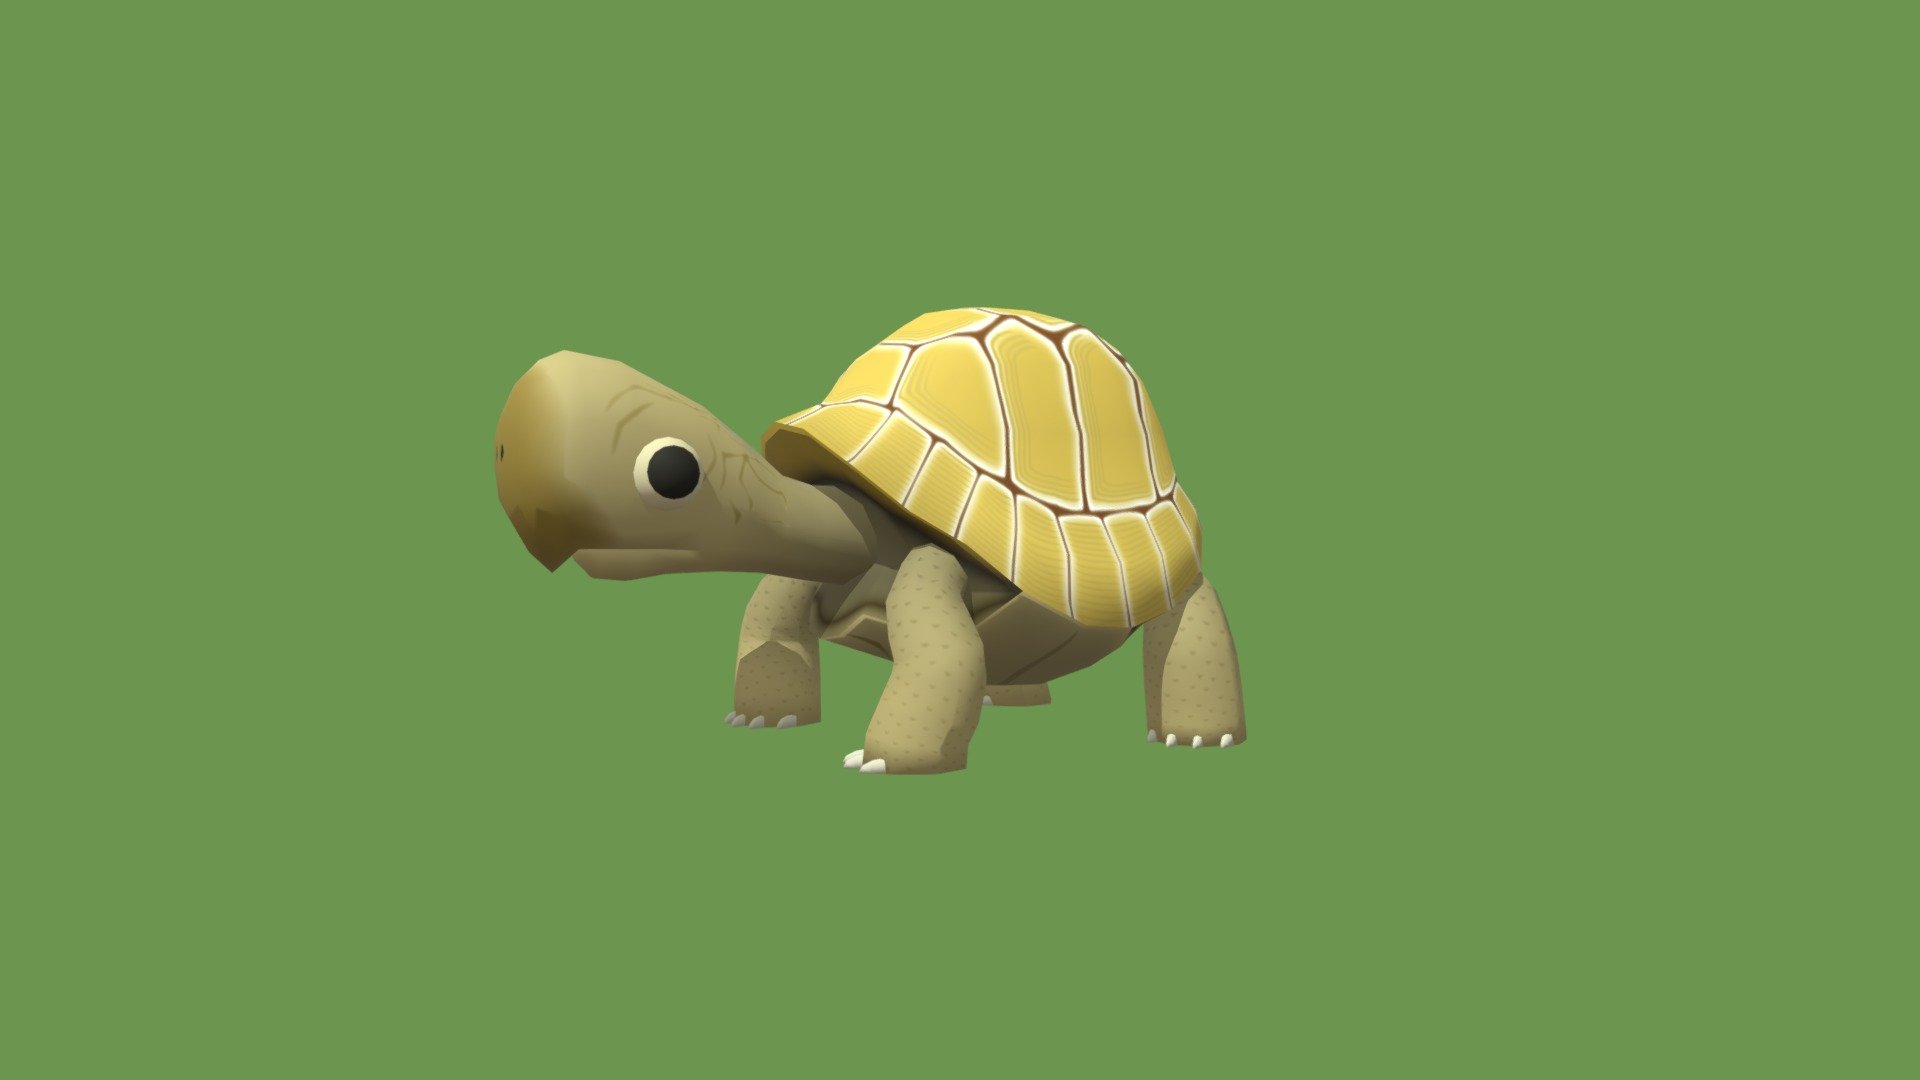 Turtle 3D for Unity - 3D model by Sigmoid Button Assets (@sigmoidbutton)  [e43d941]